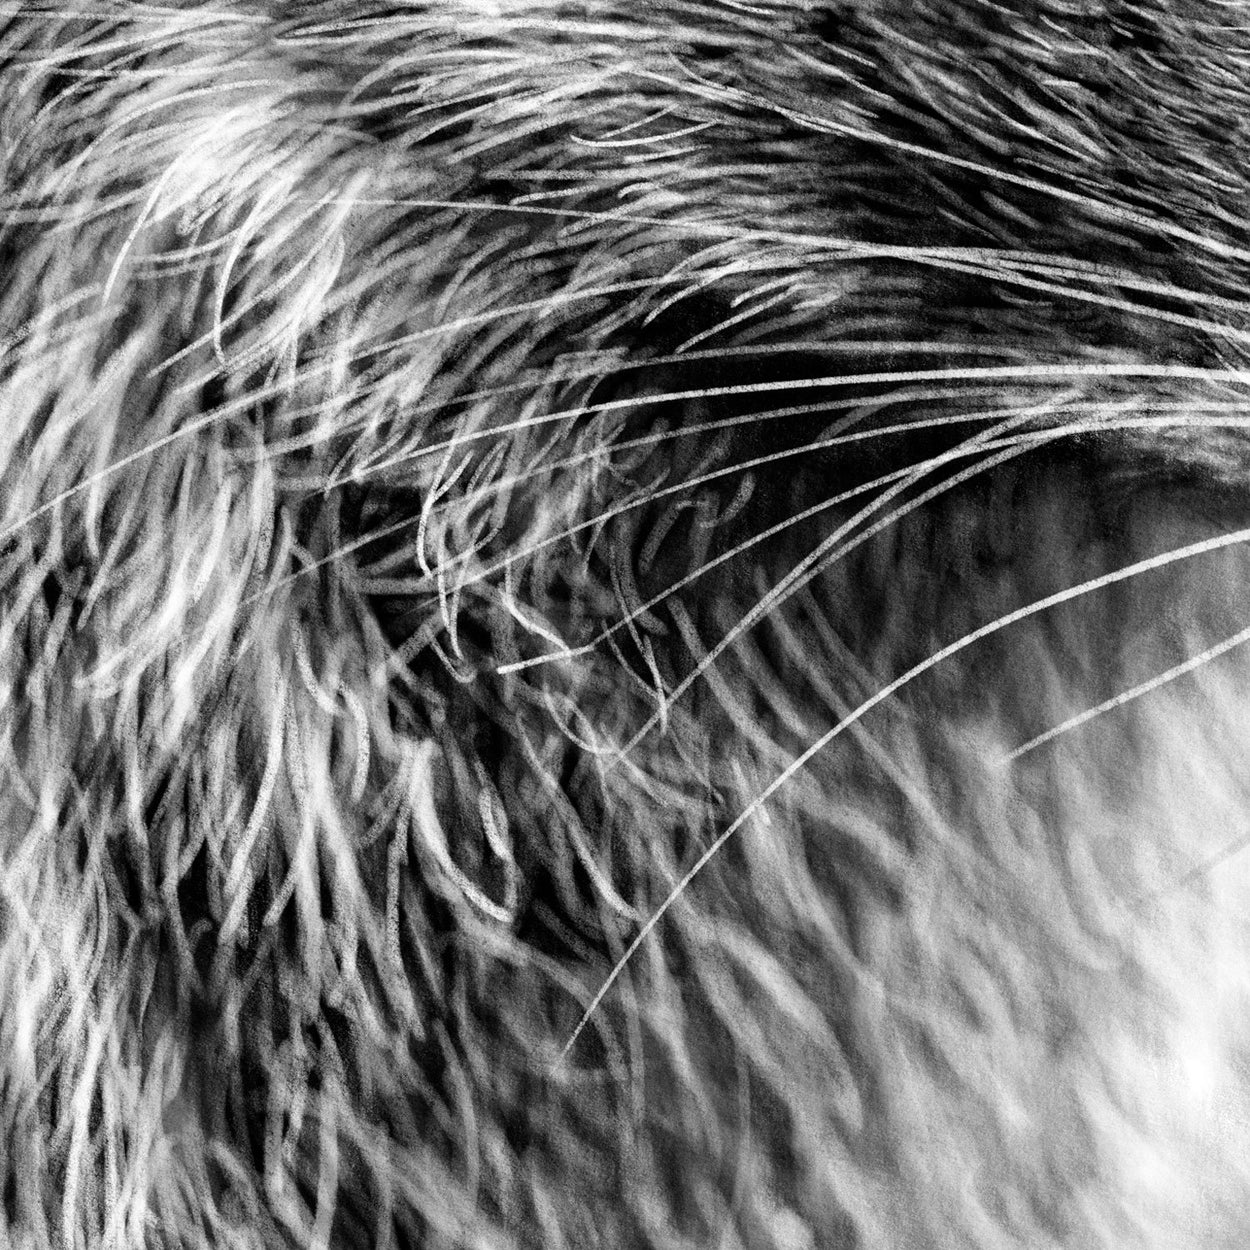 Raccoon Drawing Close-up - The Thriving Wild